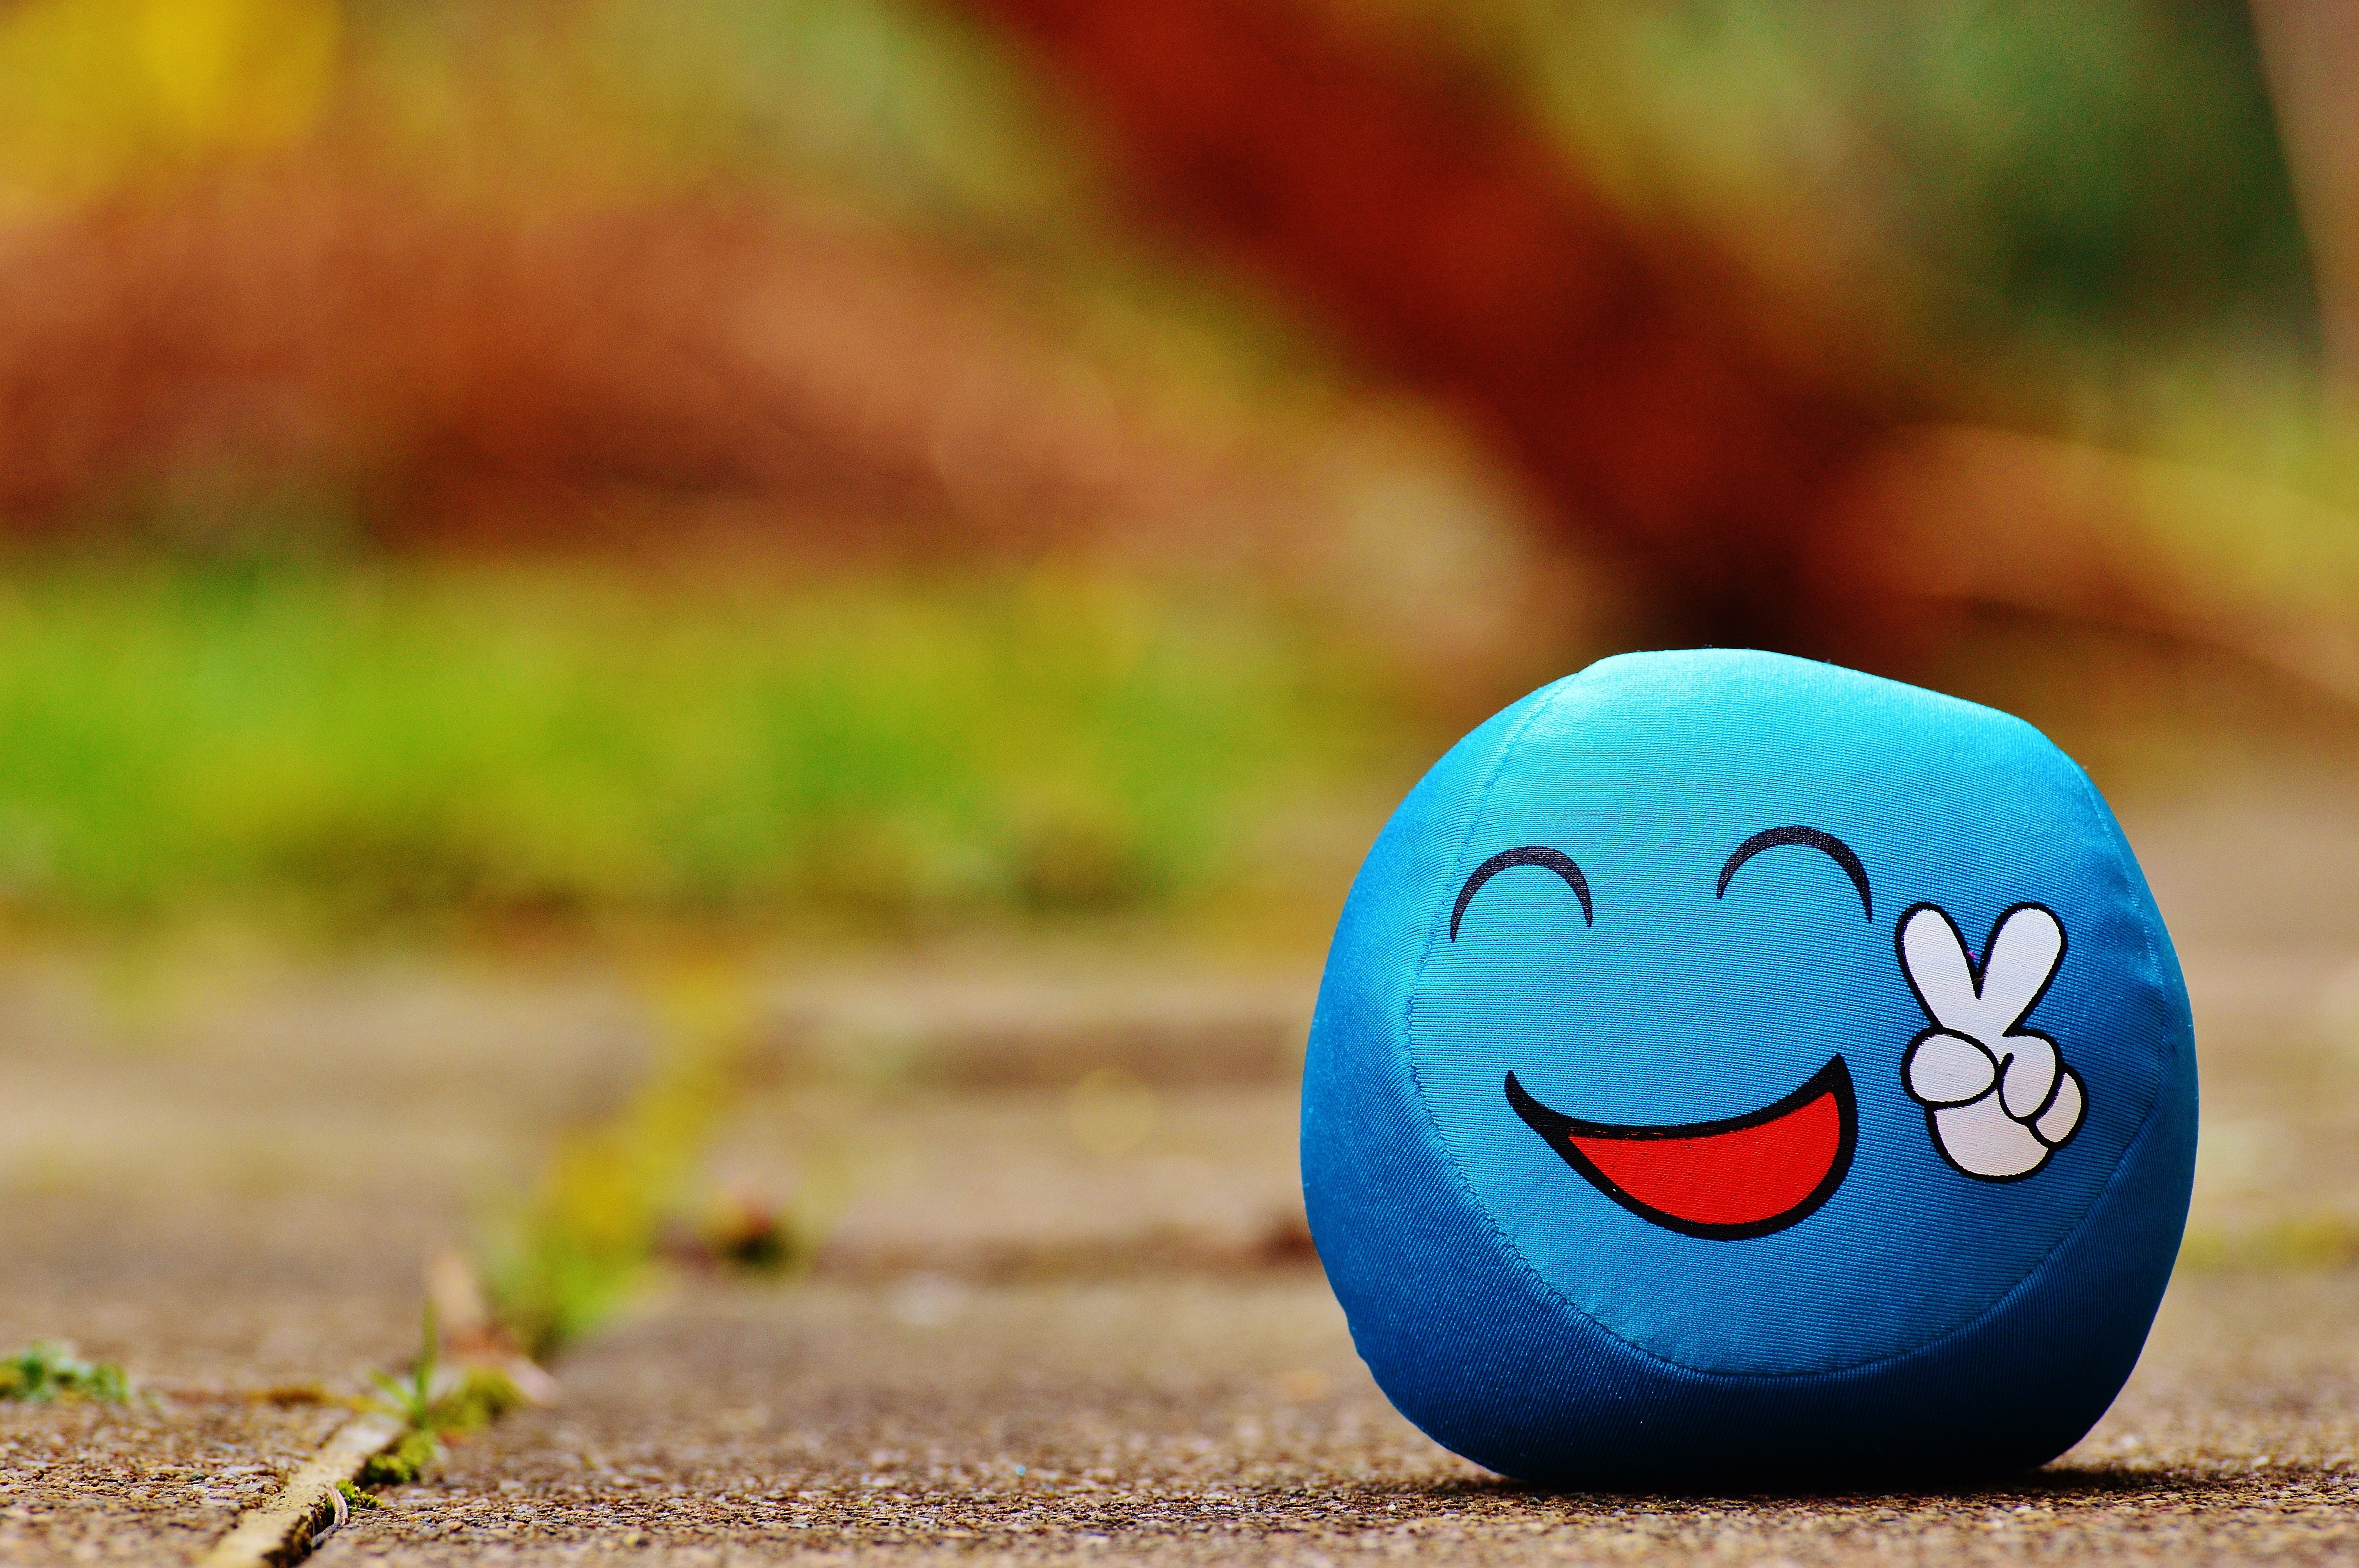 Blue Ball Toy On Ground Image